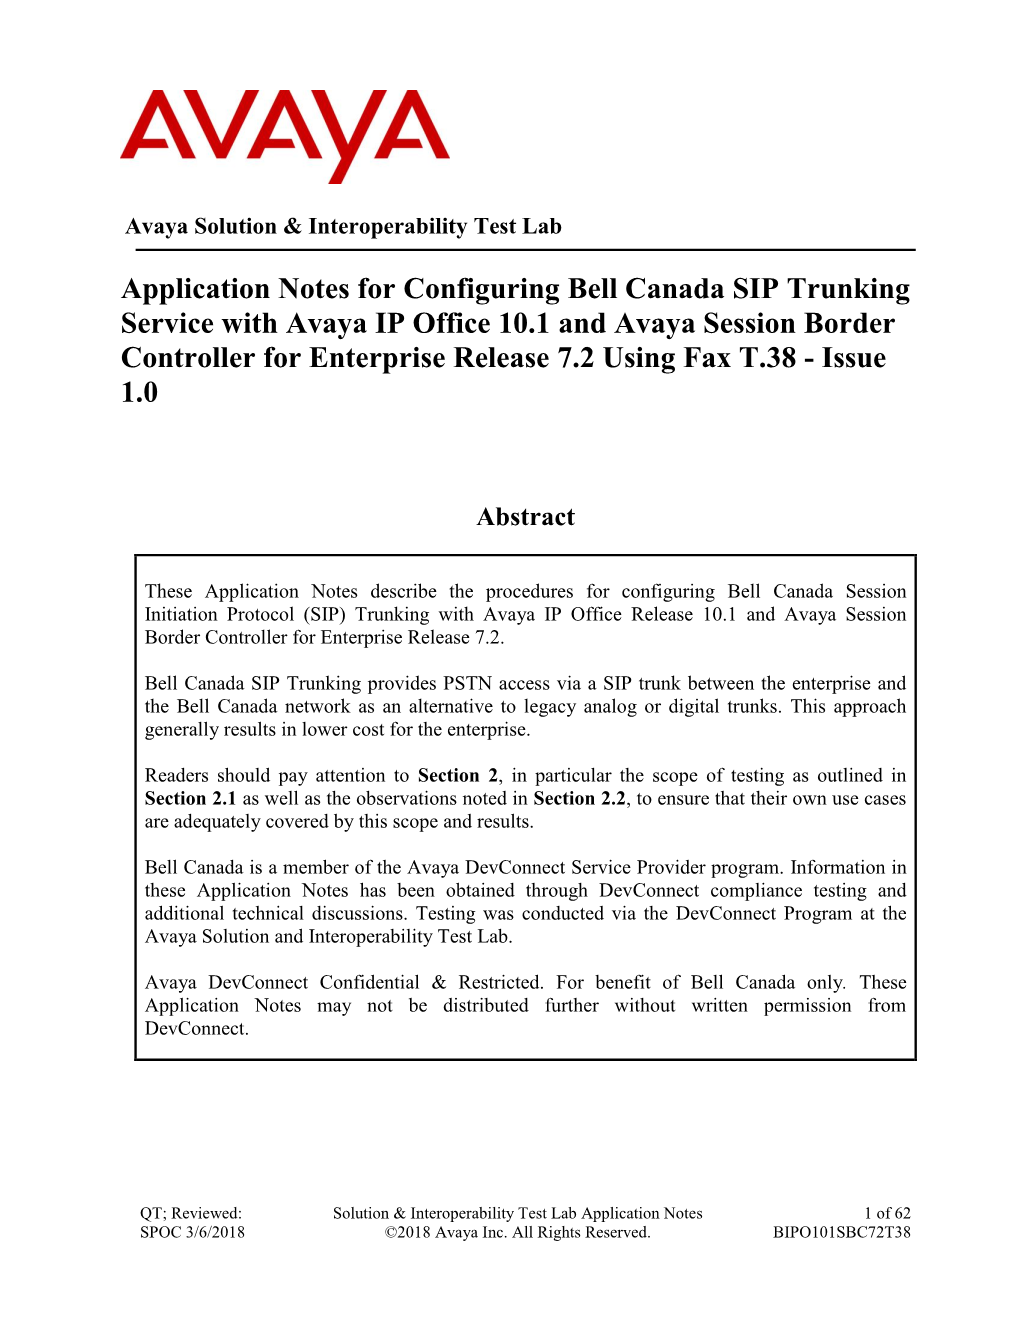 Application Notes for Configuring Bell Canada SIP Trunking Service With